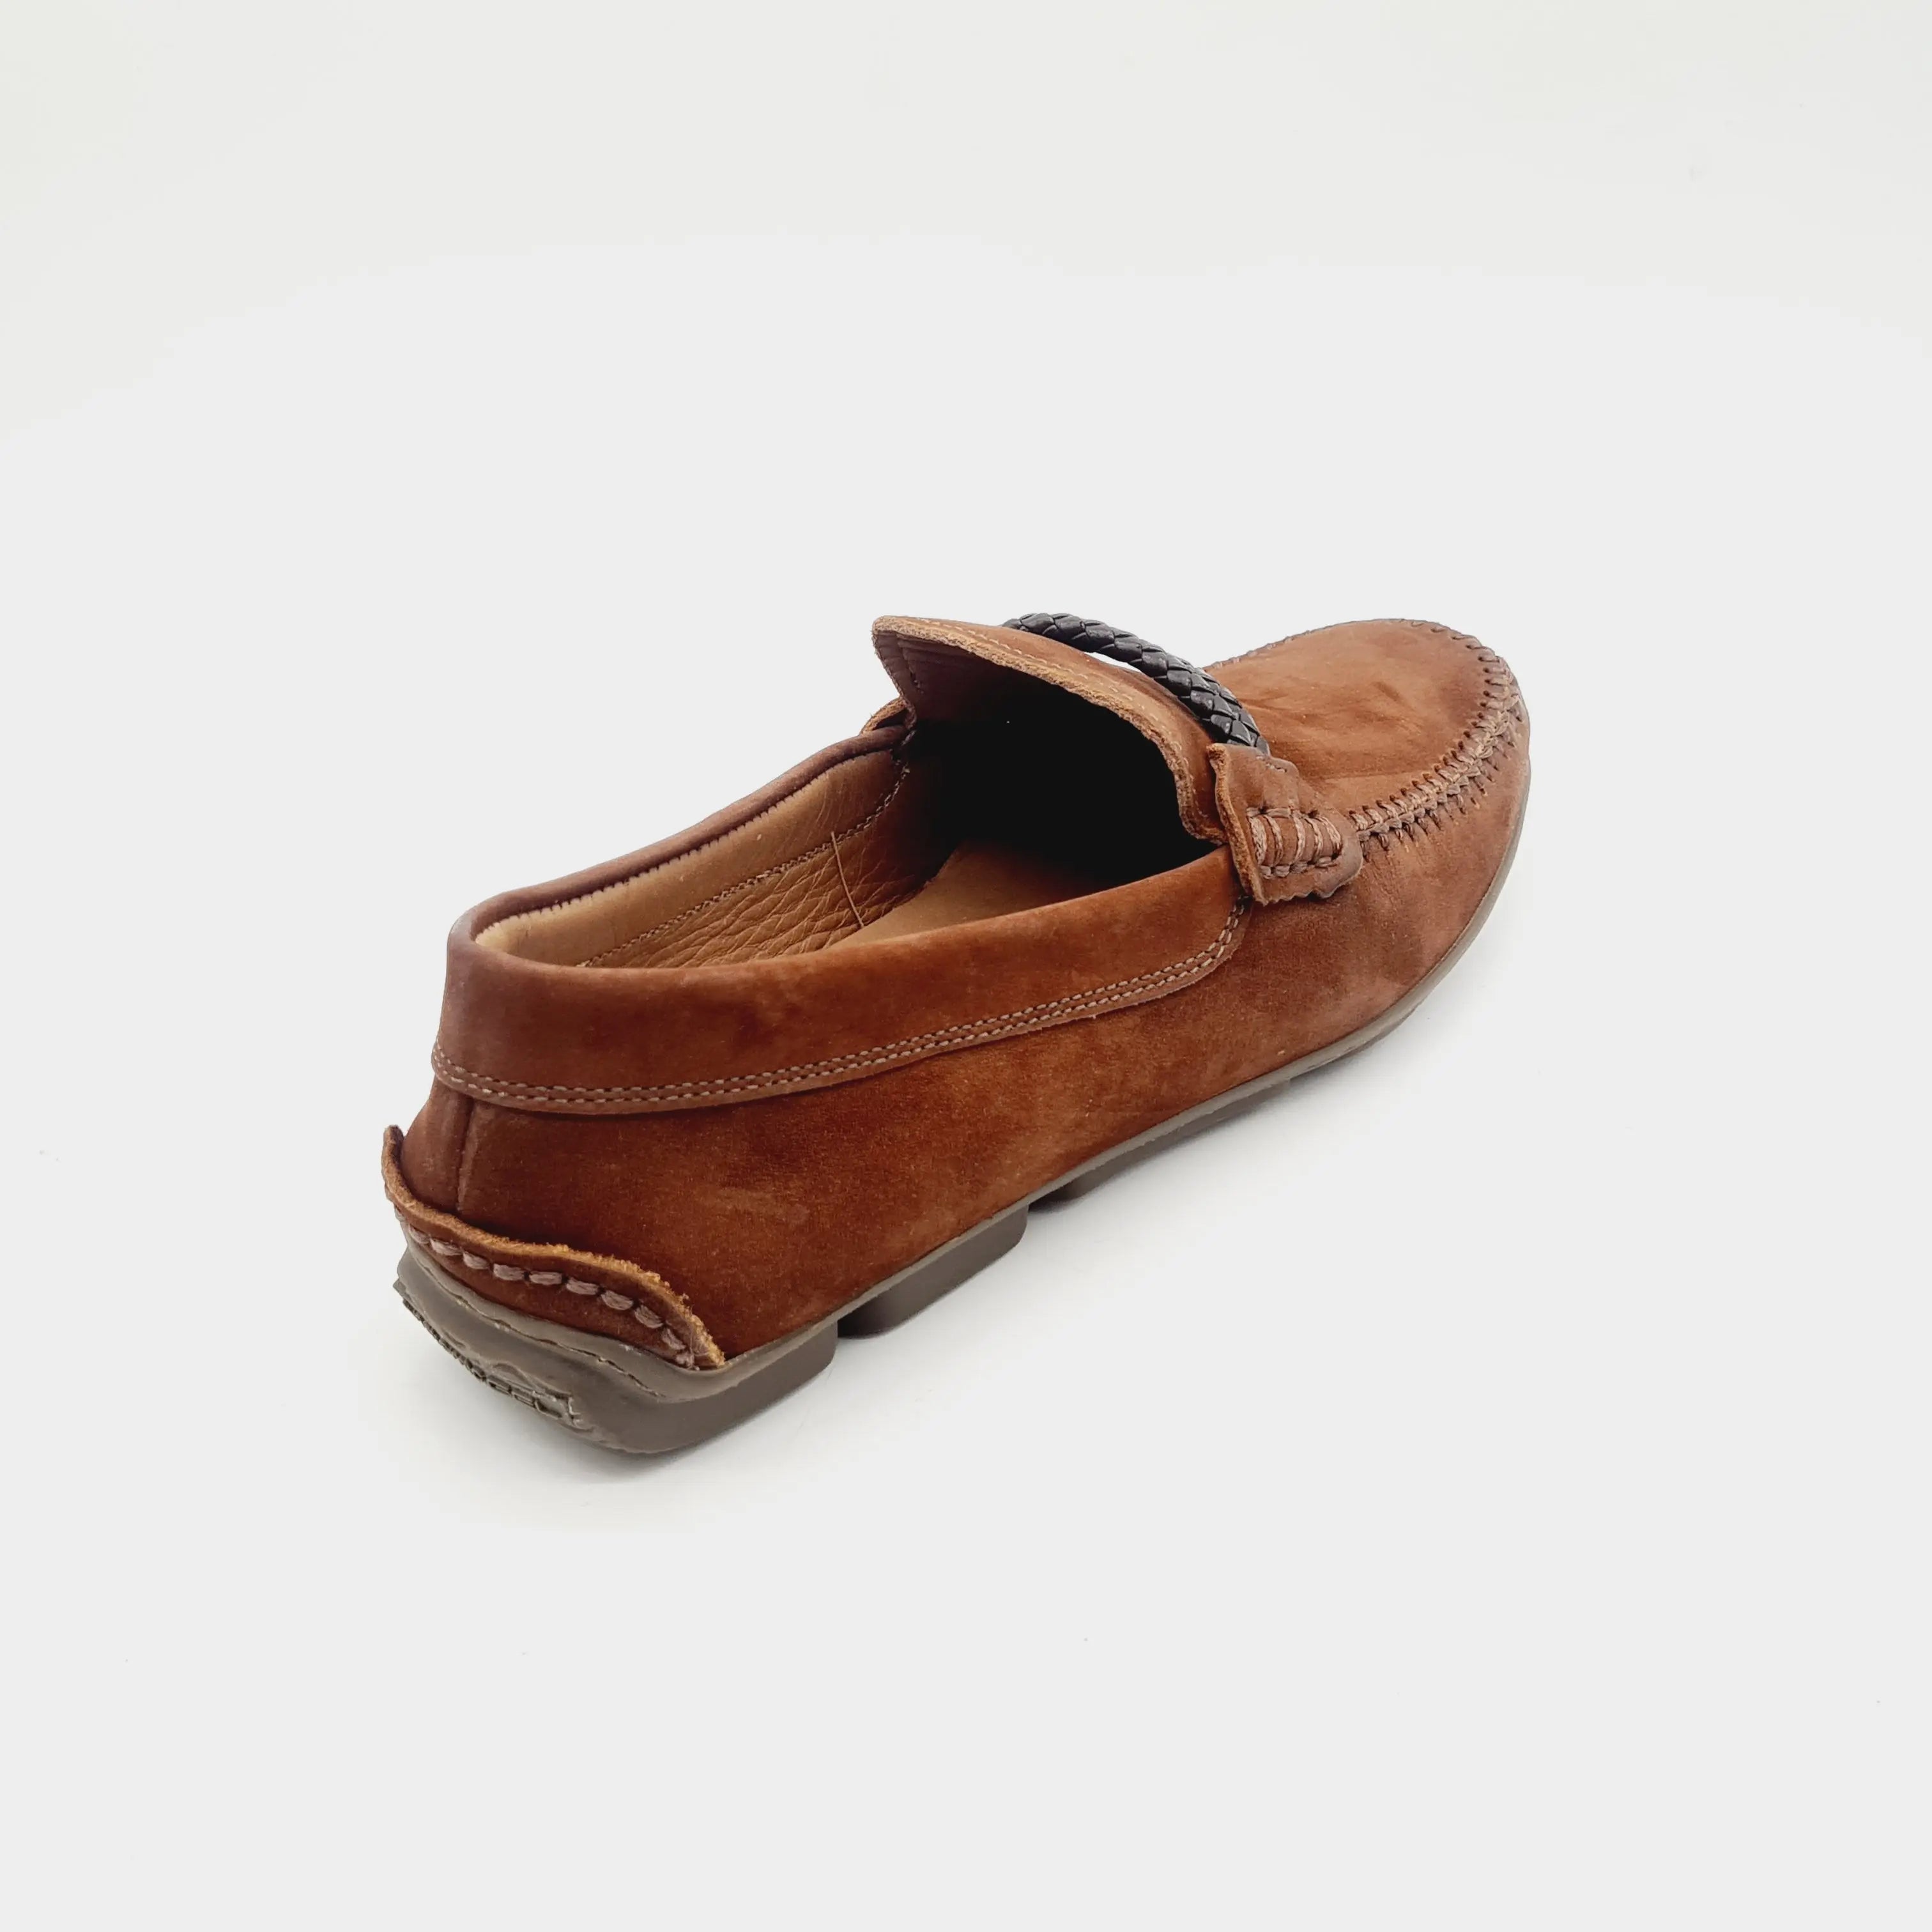 ANATOMIC 363621 BROWN Loafers | familyshoecentre